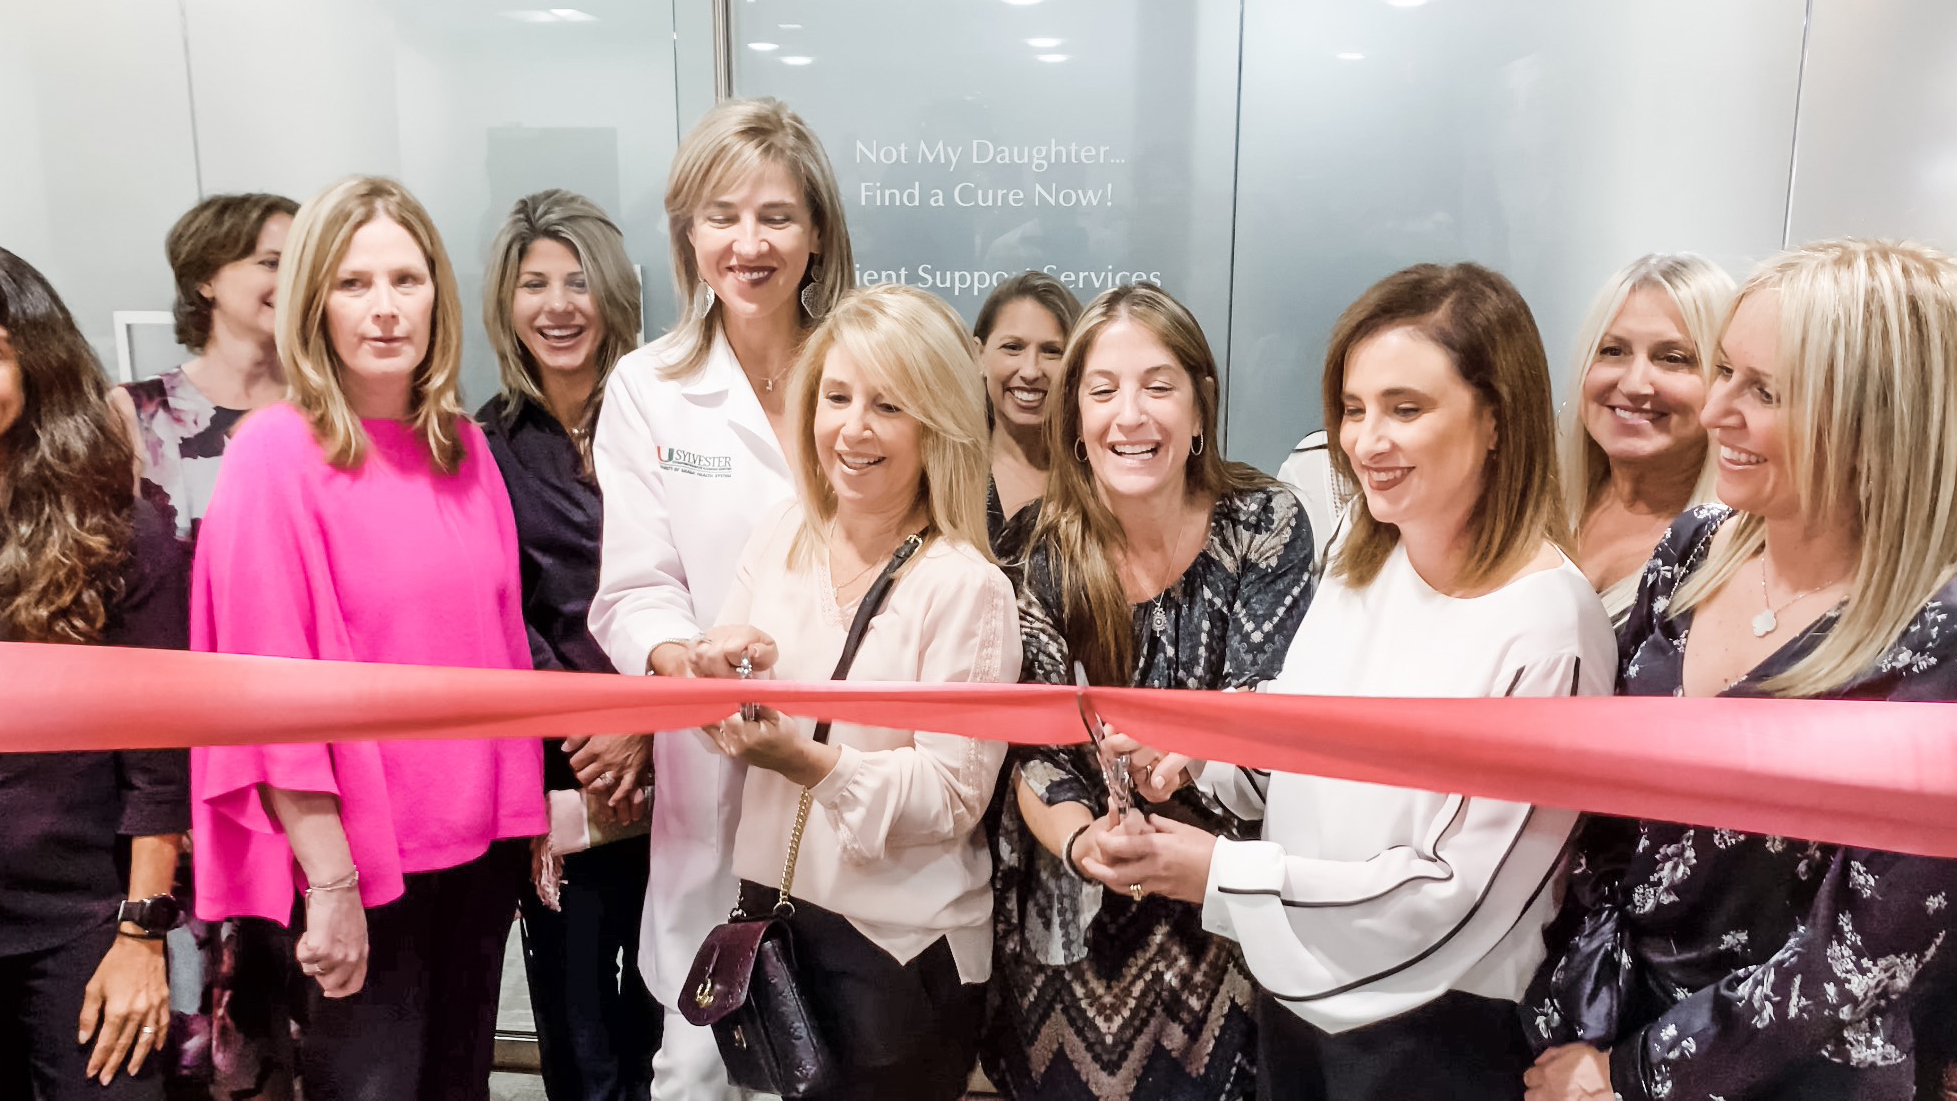 Cancer Patient Support Center Opens Thanks To This Amazing Organization 2